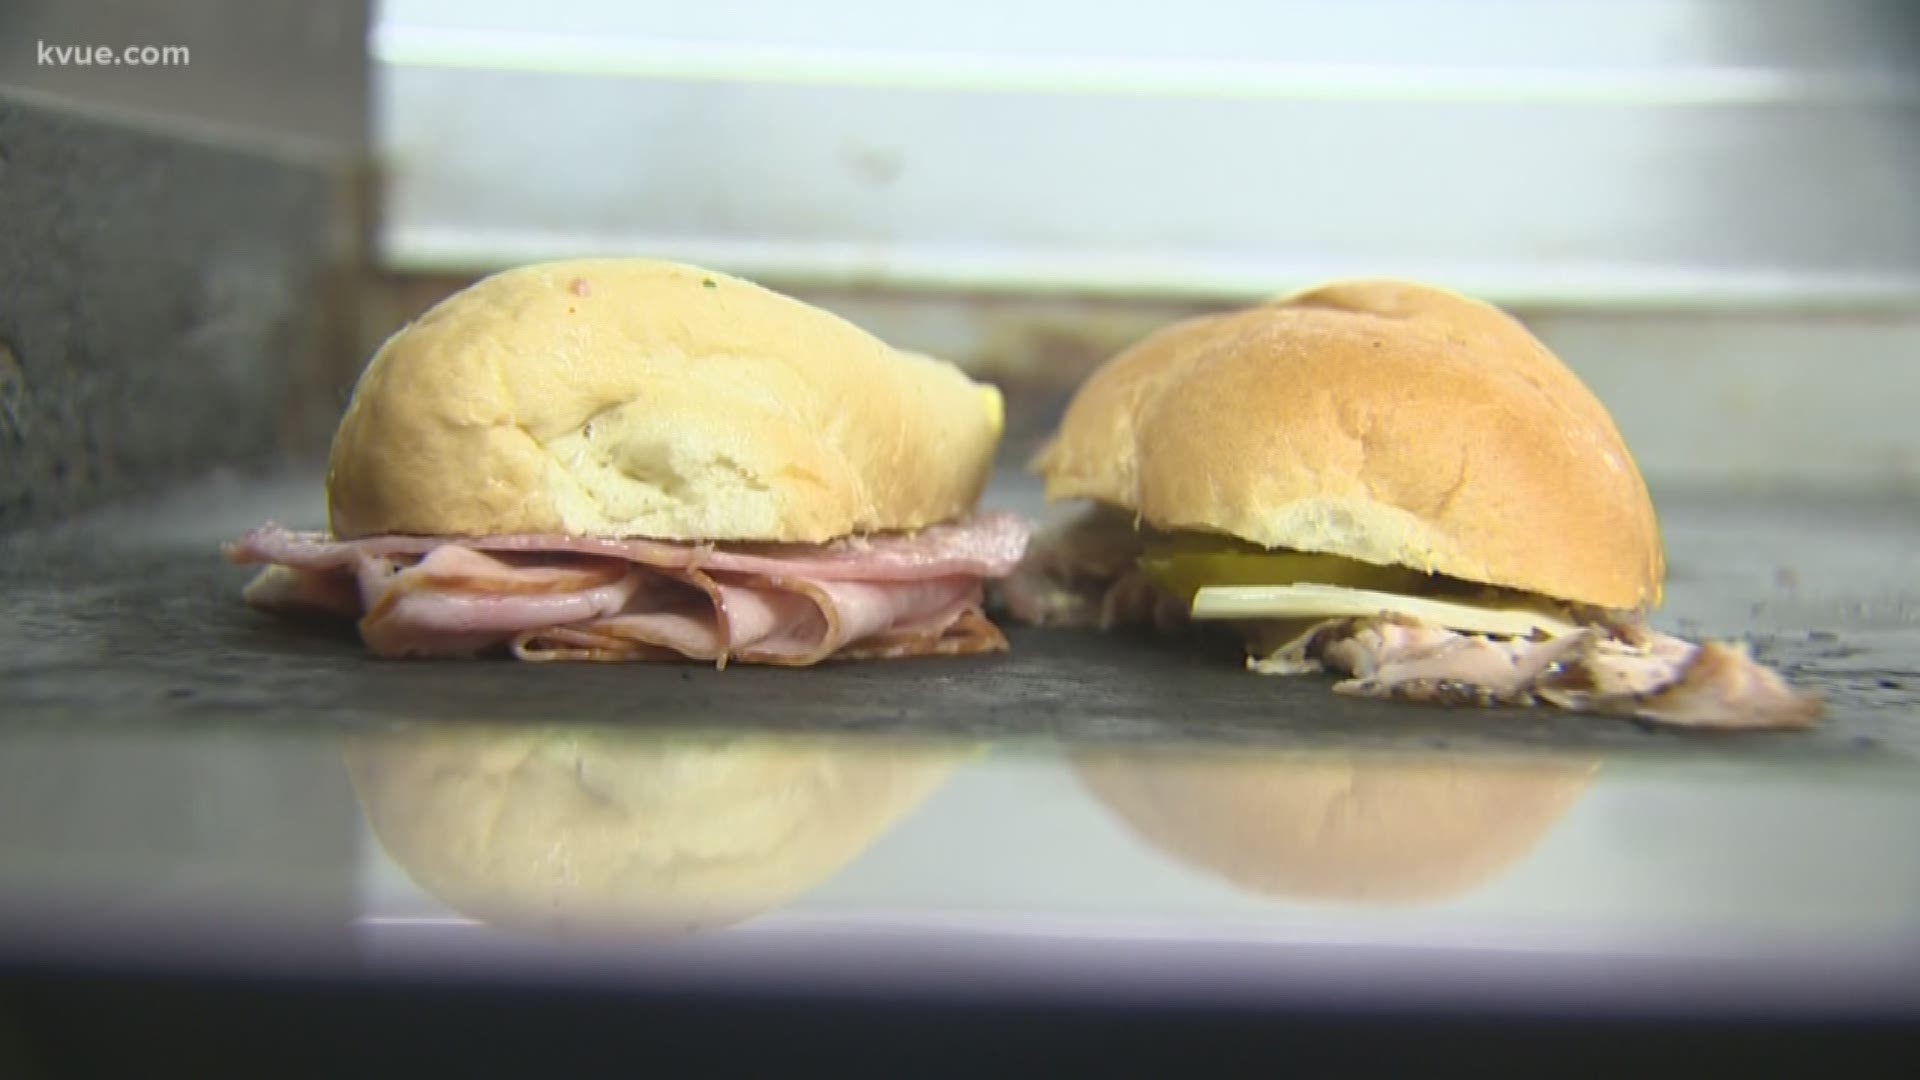 Tampa has arrived in Austin and you reap the benefits. Café Ybor serves authentic Cuban sandwiches and then some. KVUE's Daybreak team hopped on their food truck to see what they were cooking.